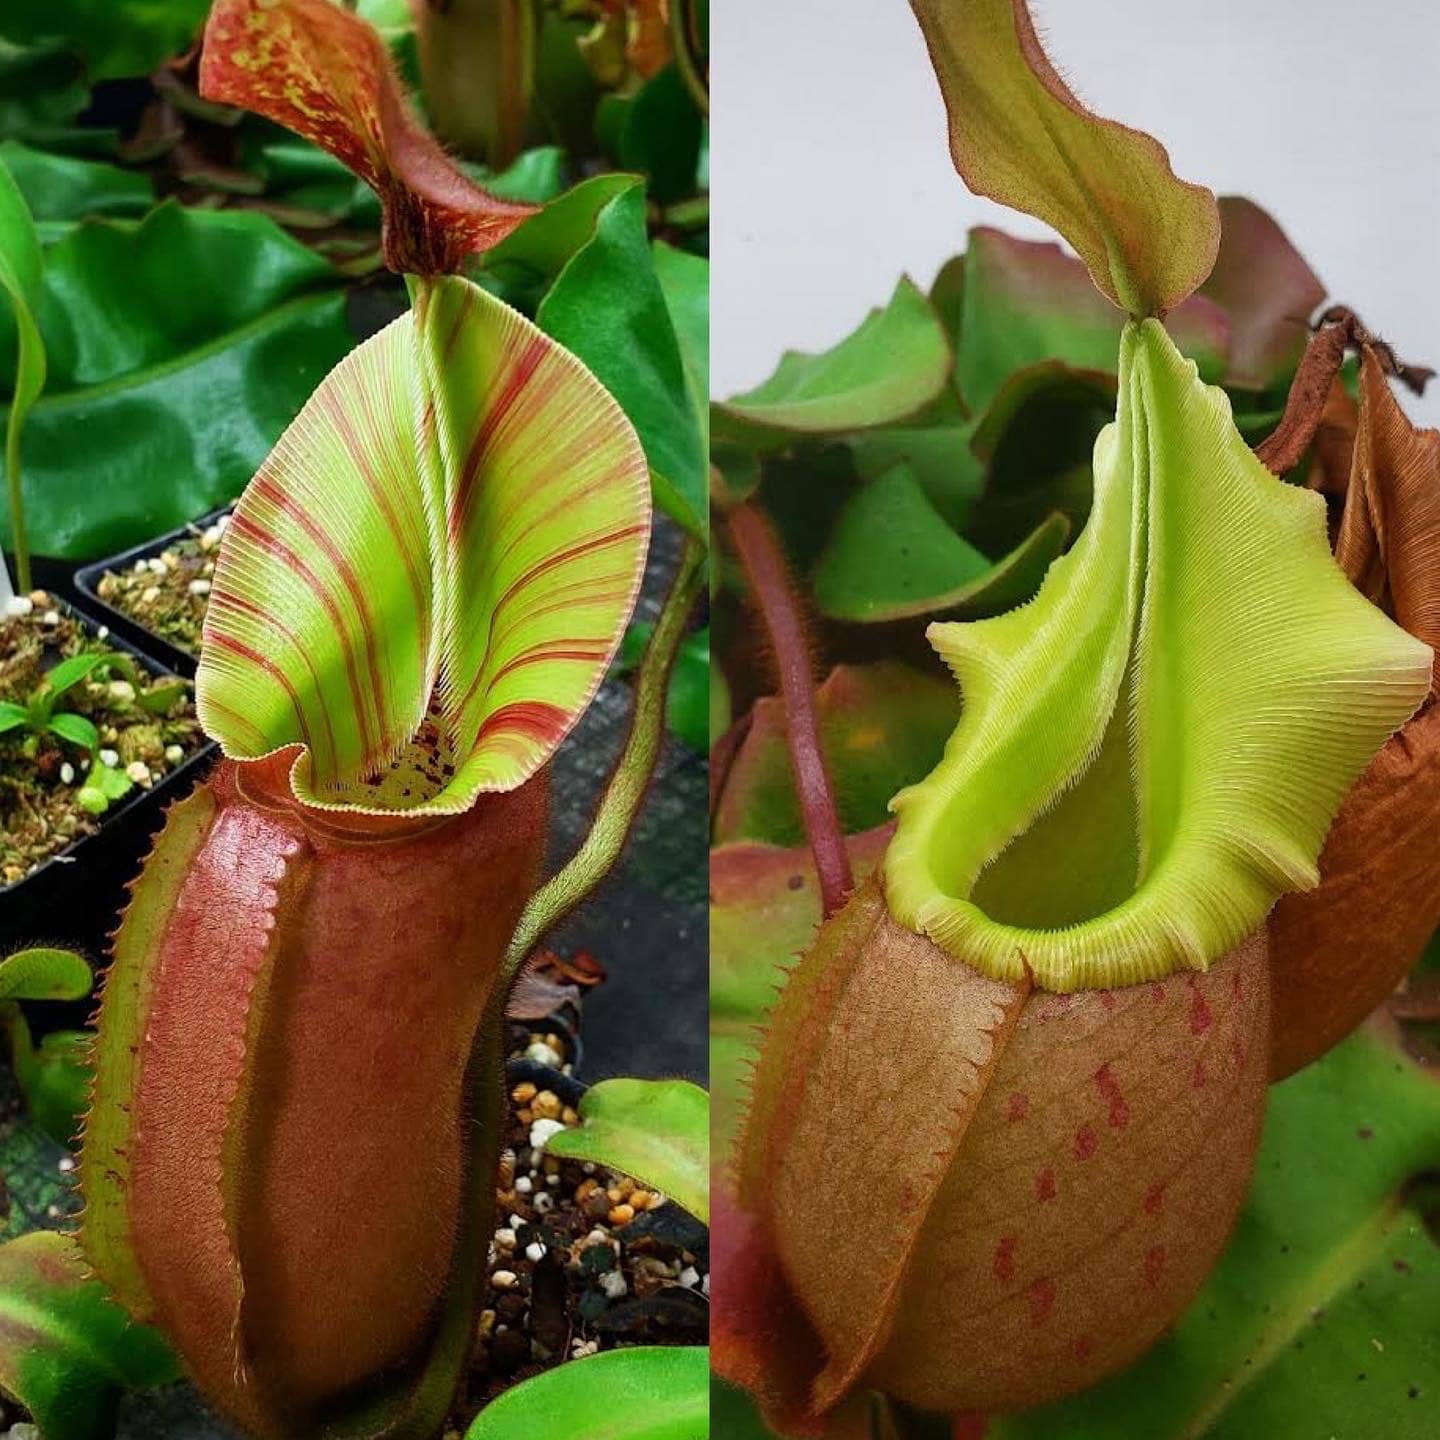 Two Nepenthes veitchii plants